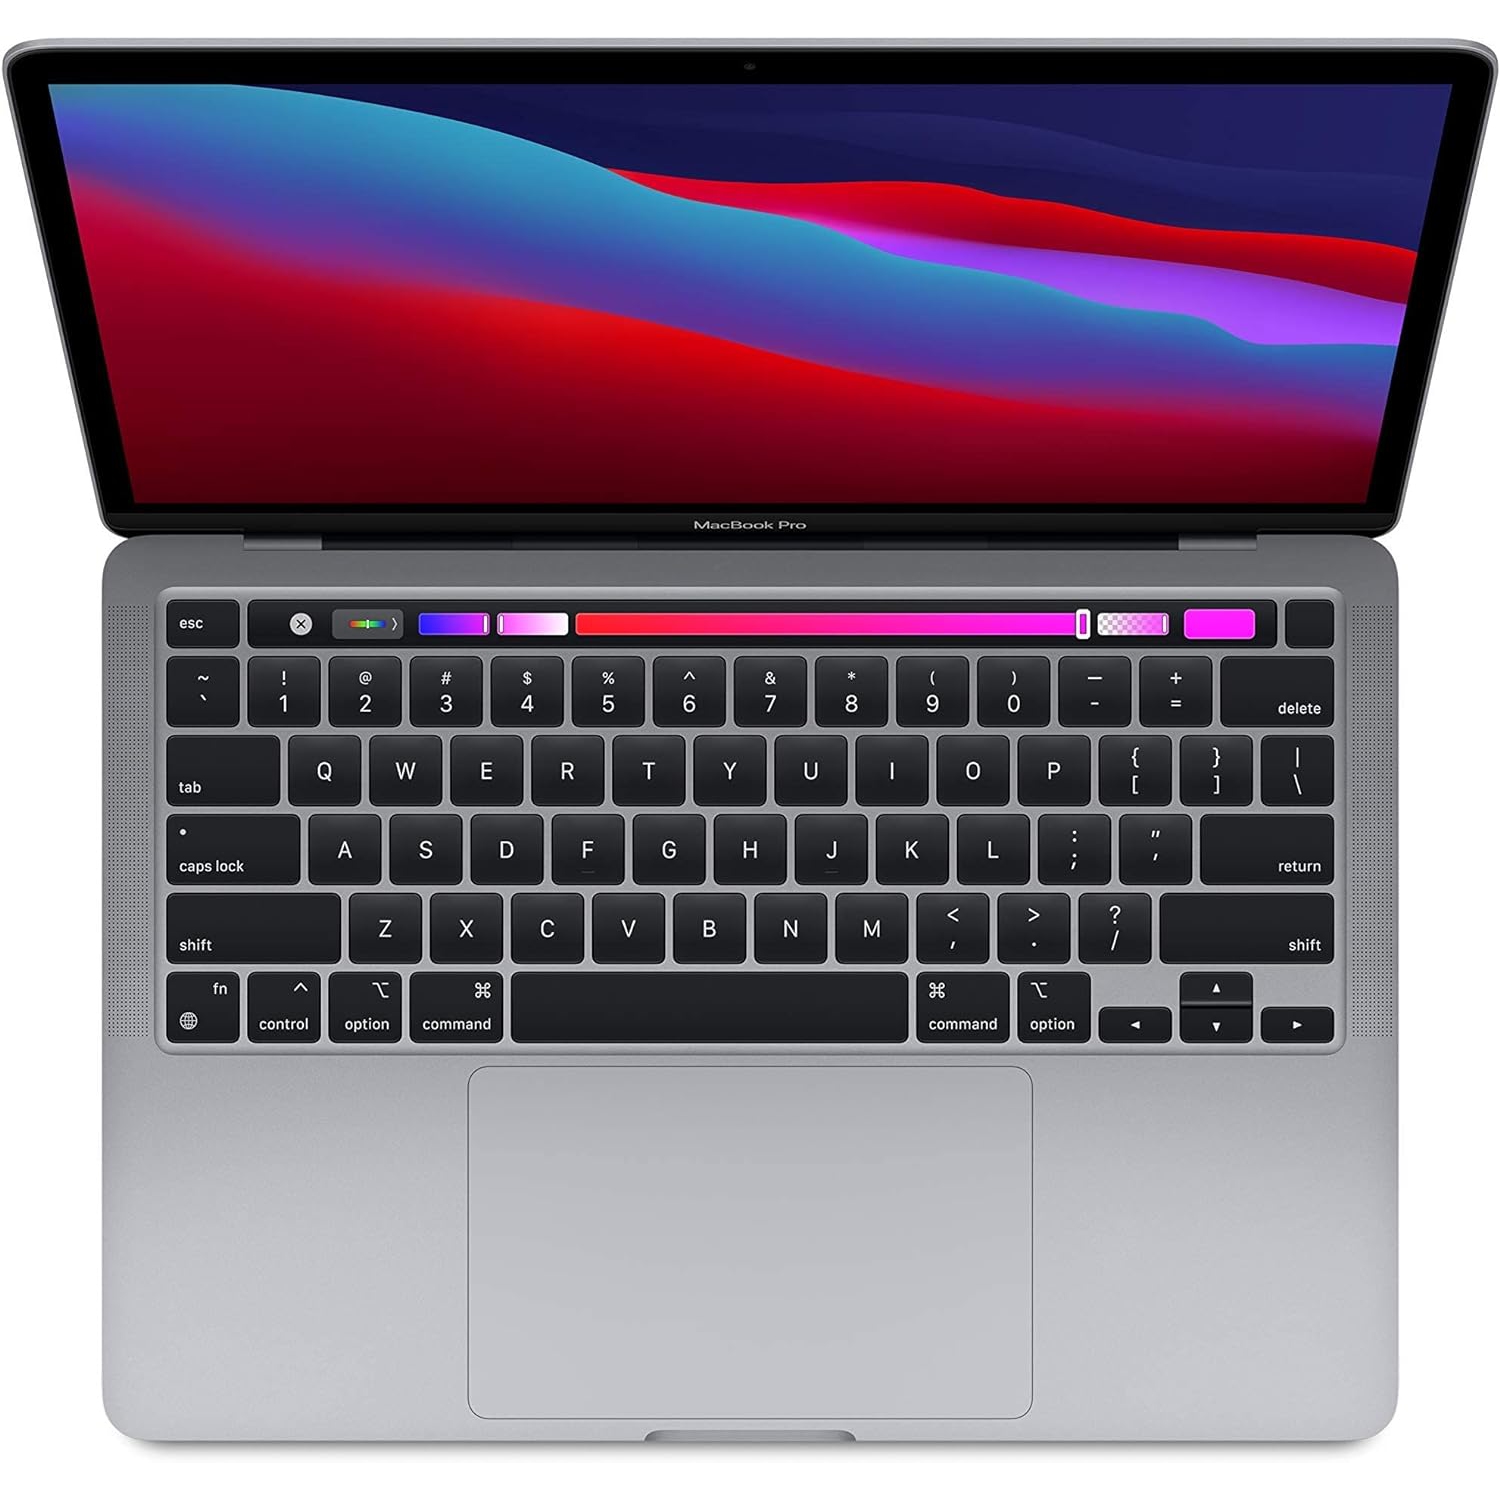 Refurbished (Excellent) - Apple MacBook Pro (Fall 2020) 13.3" w/ Touch Bar - Silver (Apple M1 Chip / 512GB SSD / 8GB RAM) - EnBrand: AppleMod